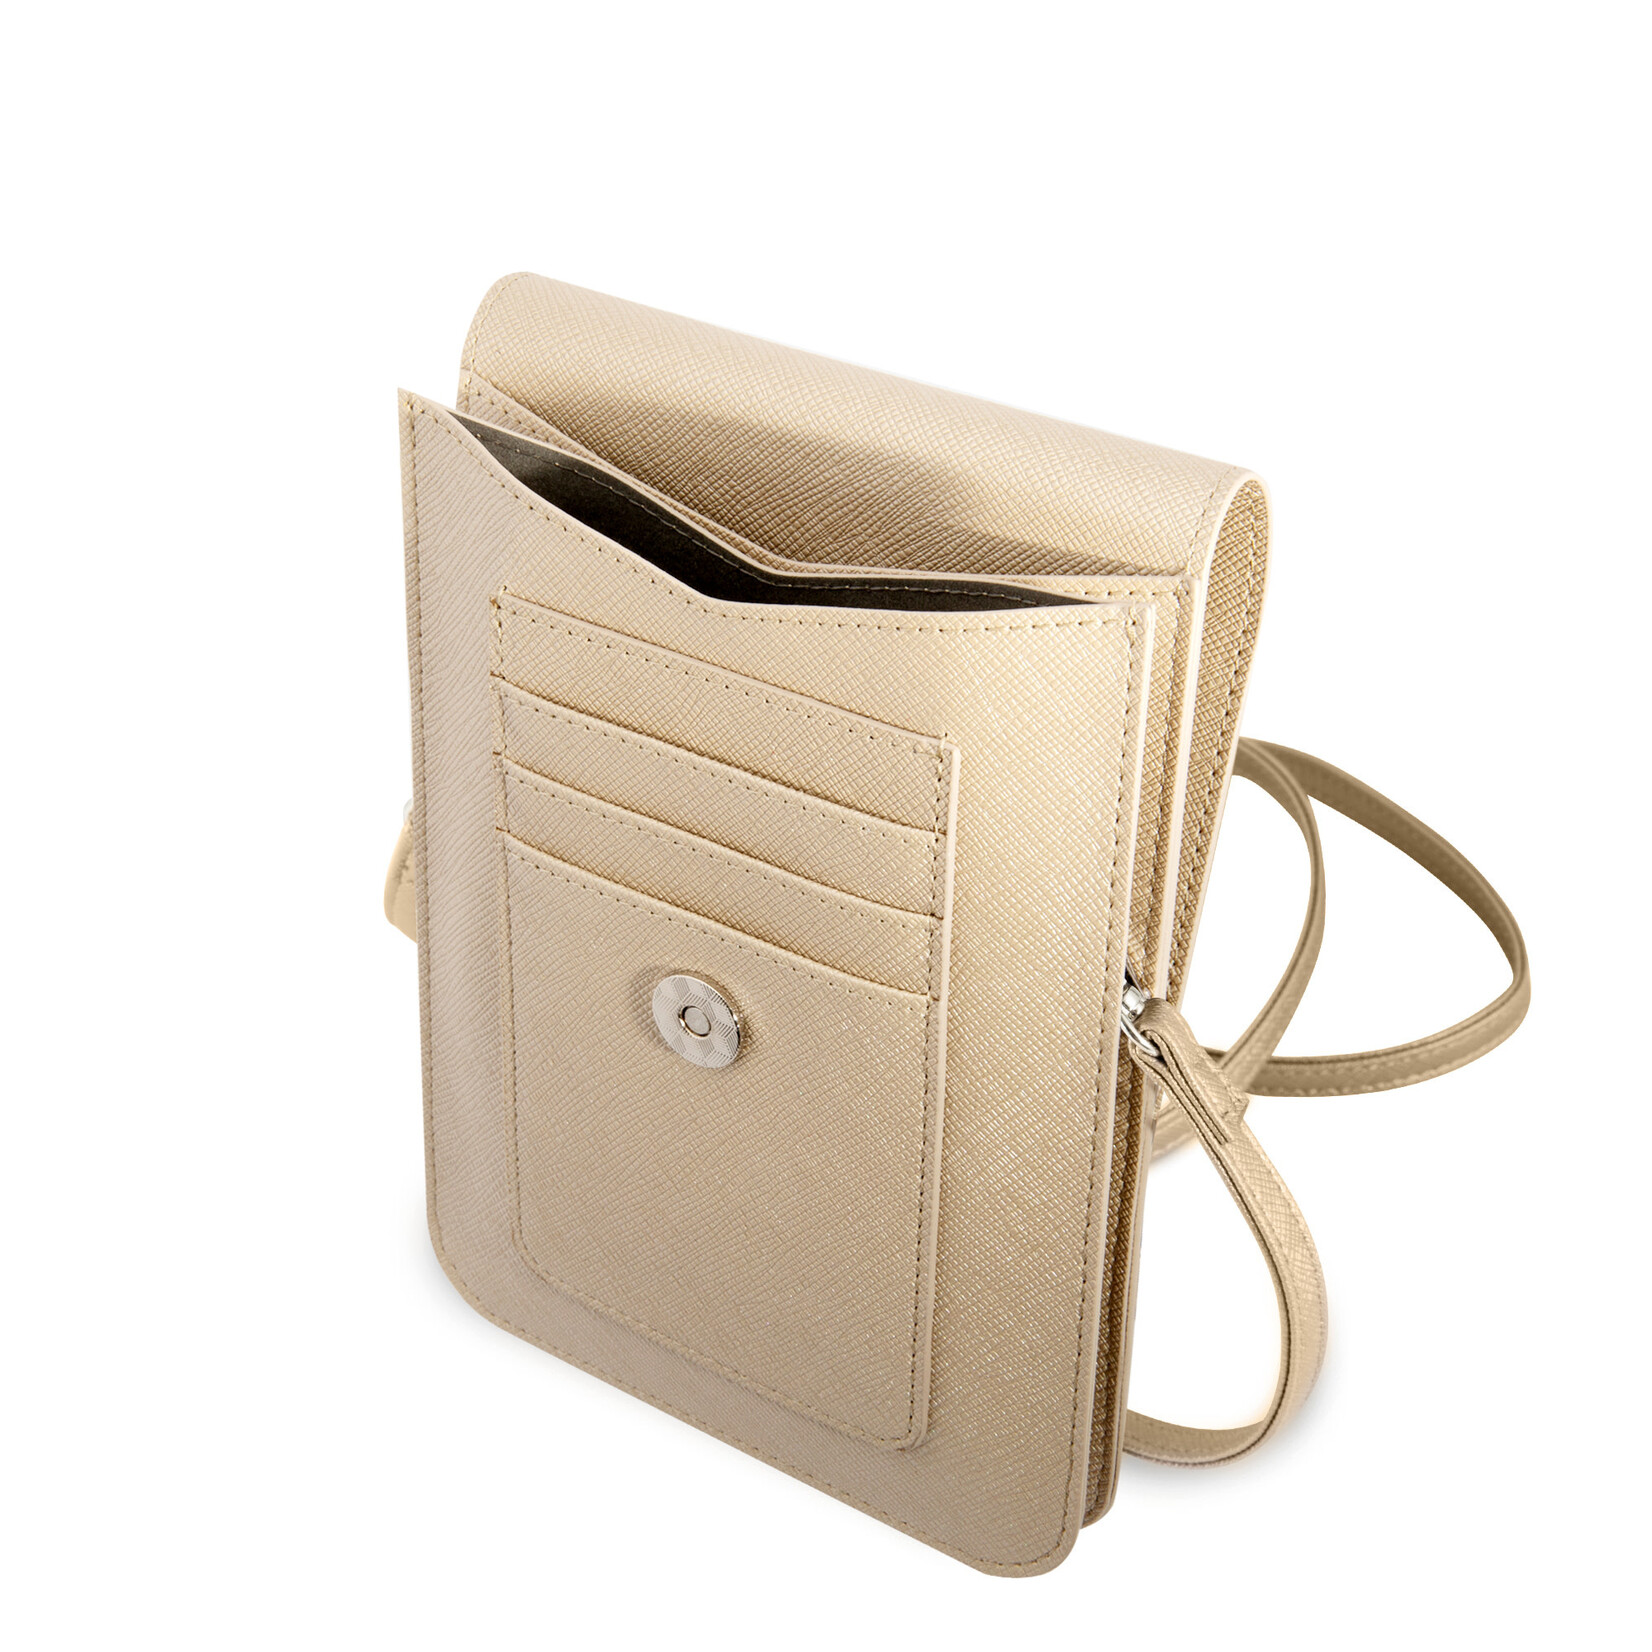 Guess Guess 7 inch Saffiano Wallet bag - Beige - Triangle